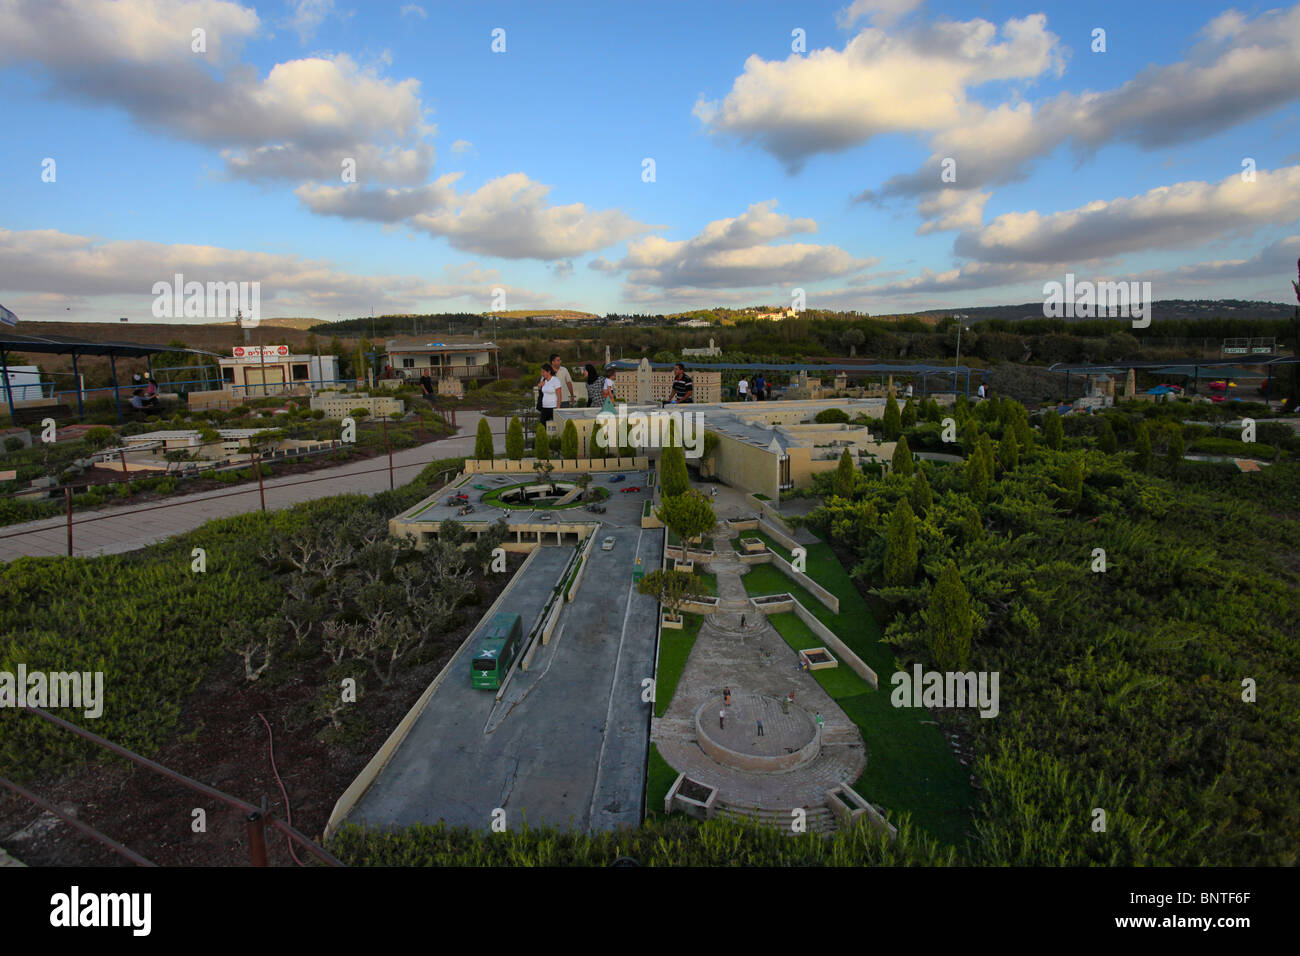 Visitors amid miniature replica of Israel landmarks displayed in Mini Israel a miniature park located near Latrun, in the Ayalon Valley. Israel the site contains miniature replicas of hundreds of buildings and landmarks in Israel. Stock Photo